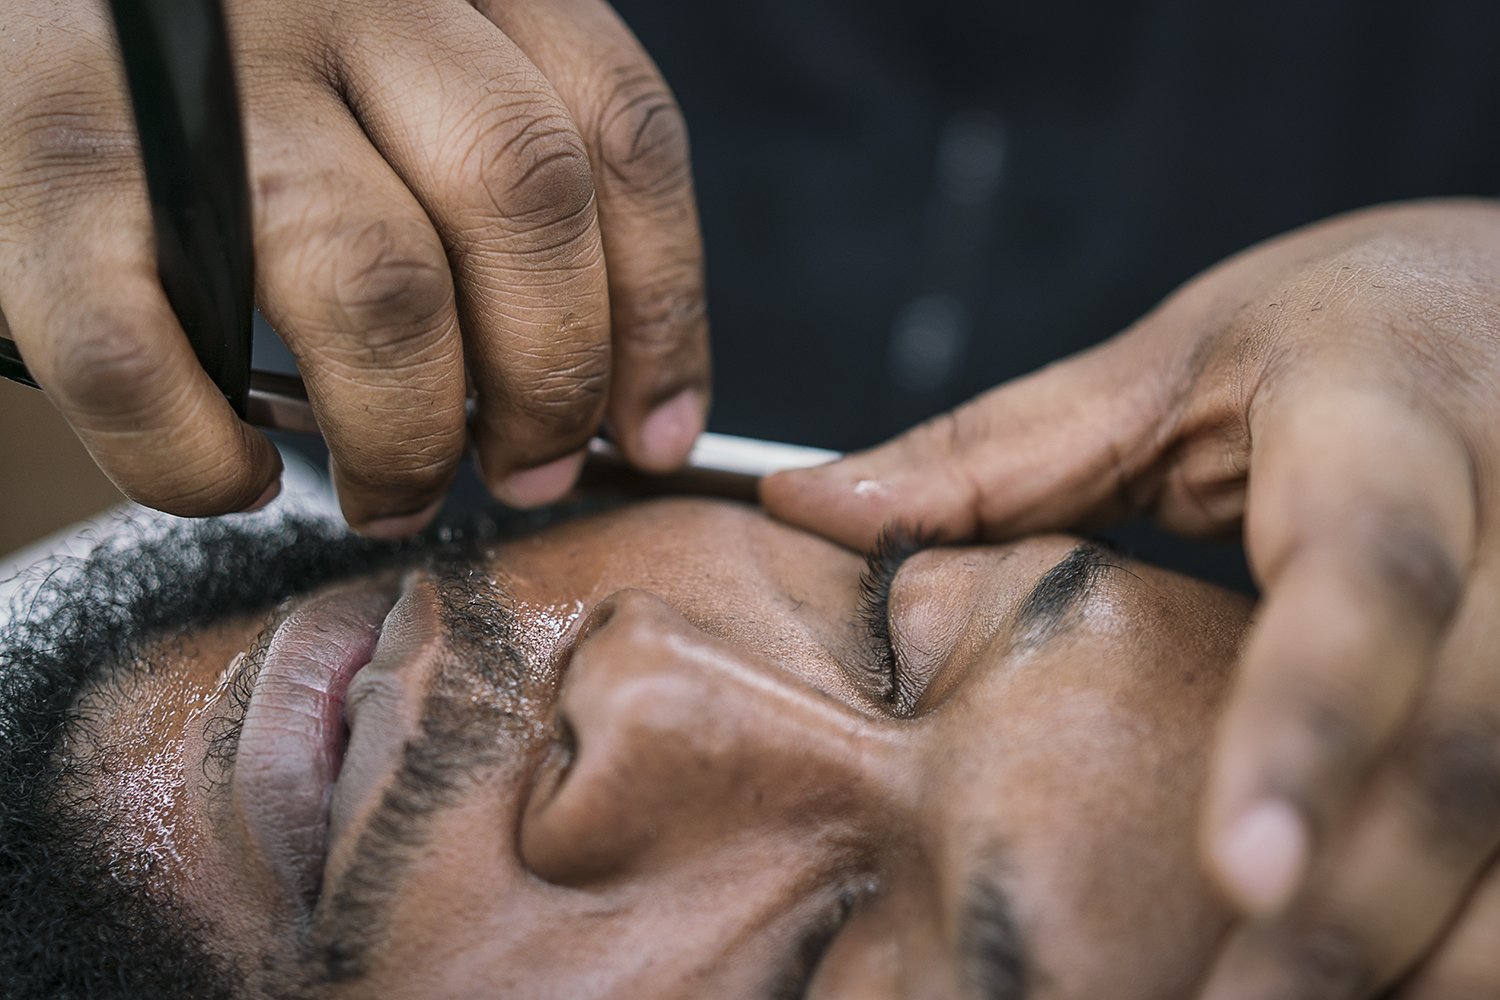 Flint, MI - Tuesday, February 6, 2018: Flint resident Brandon Ashley, 34, reclines as he is given a straight razor shave at the Flint Institute of Barbering.